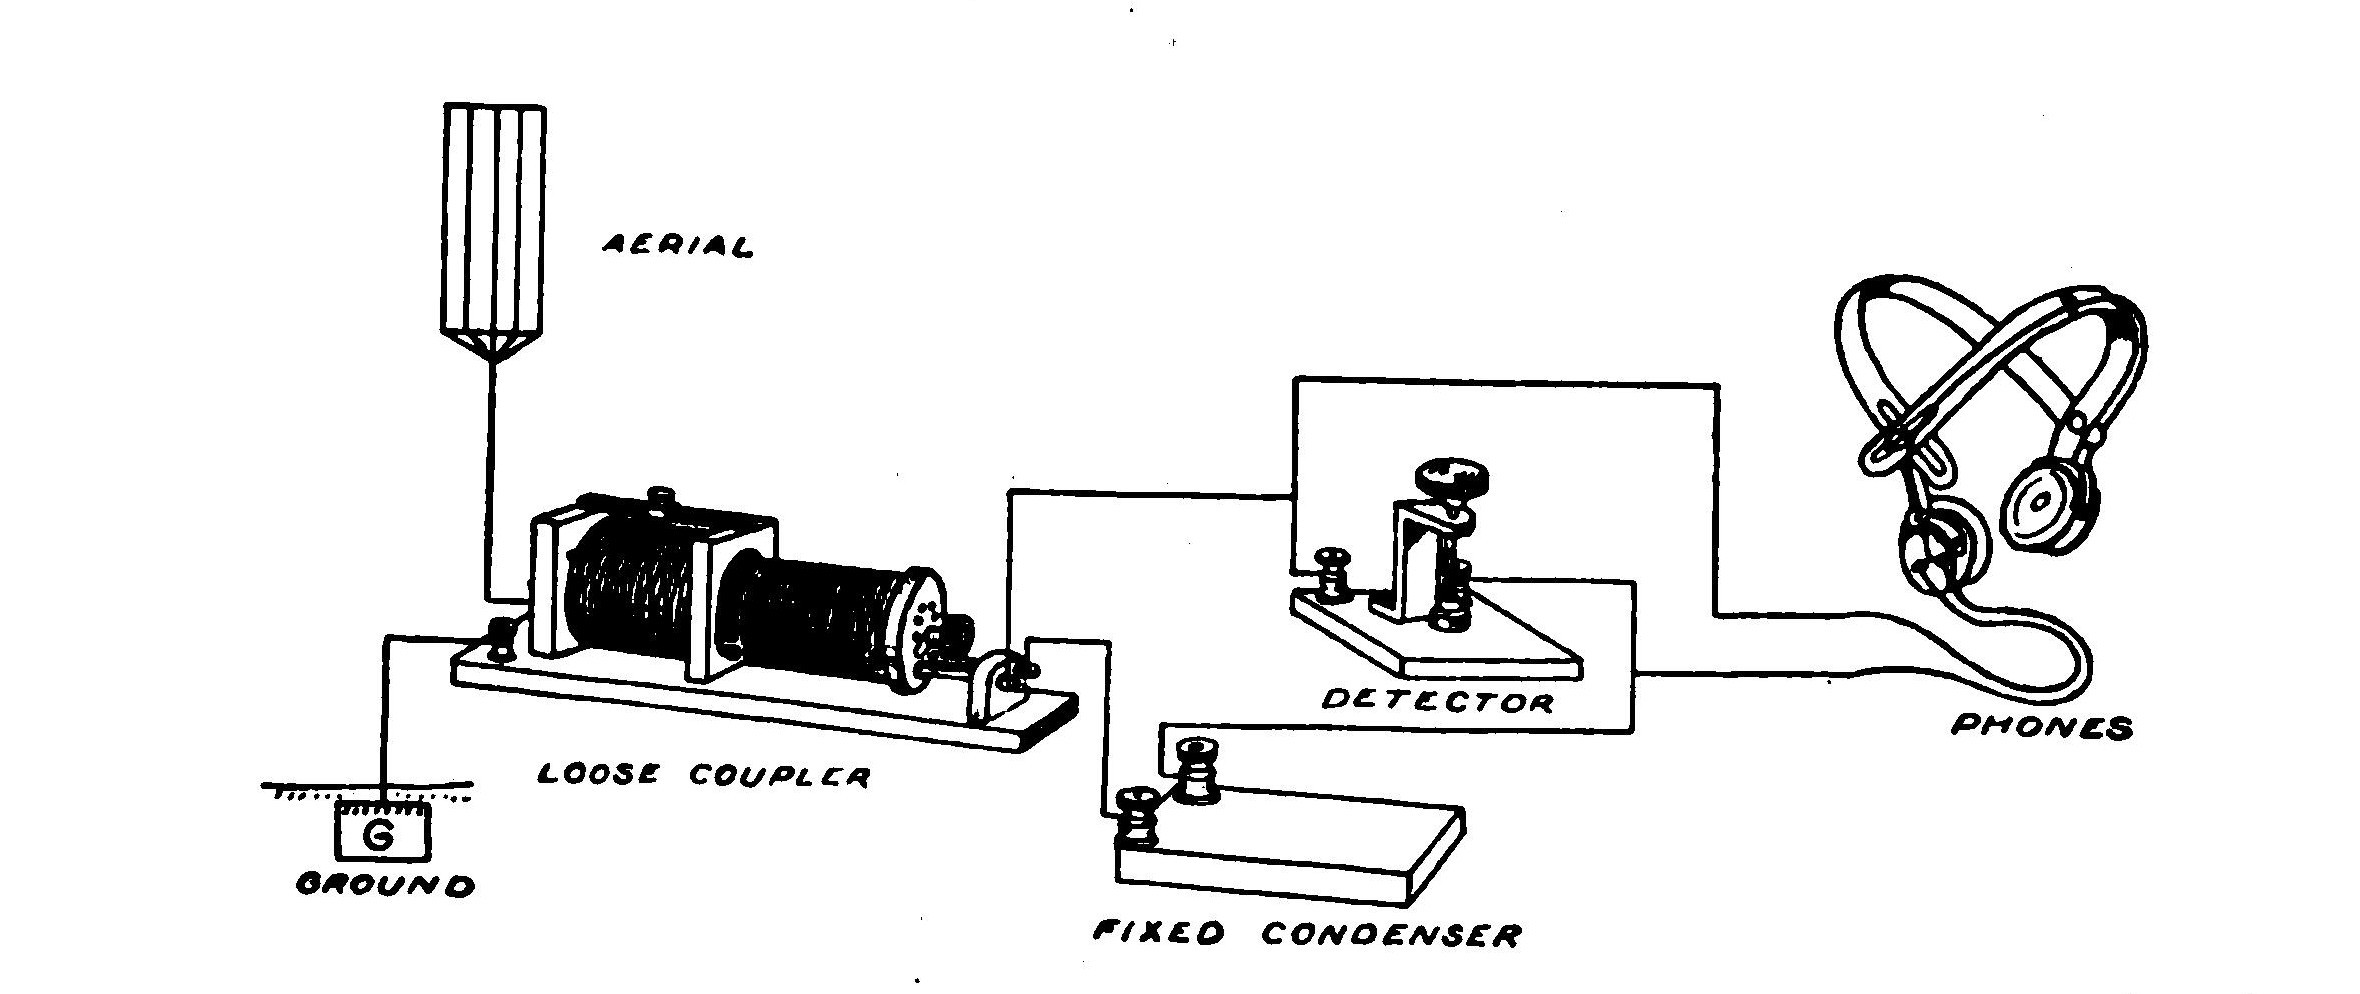 FIG. 93.—Diagram showing position of loose coupler in circuit.